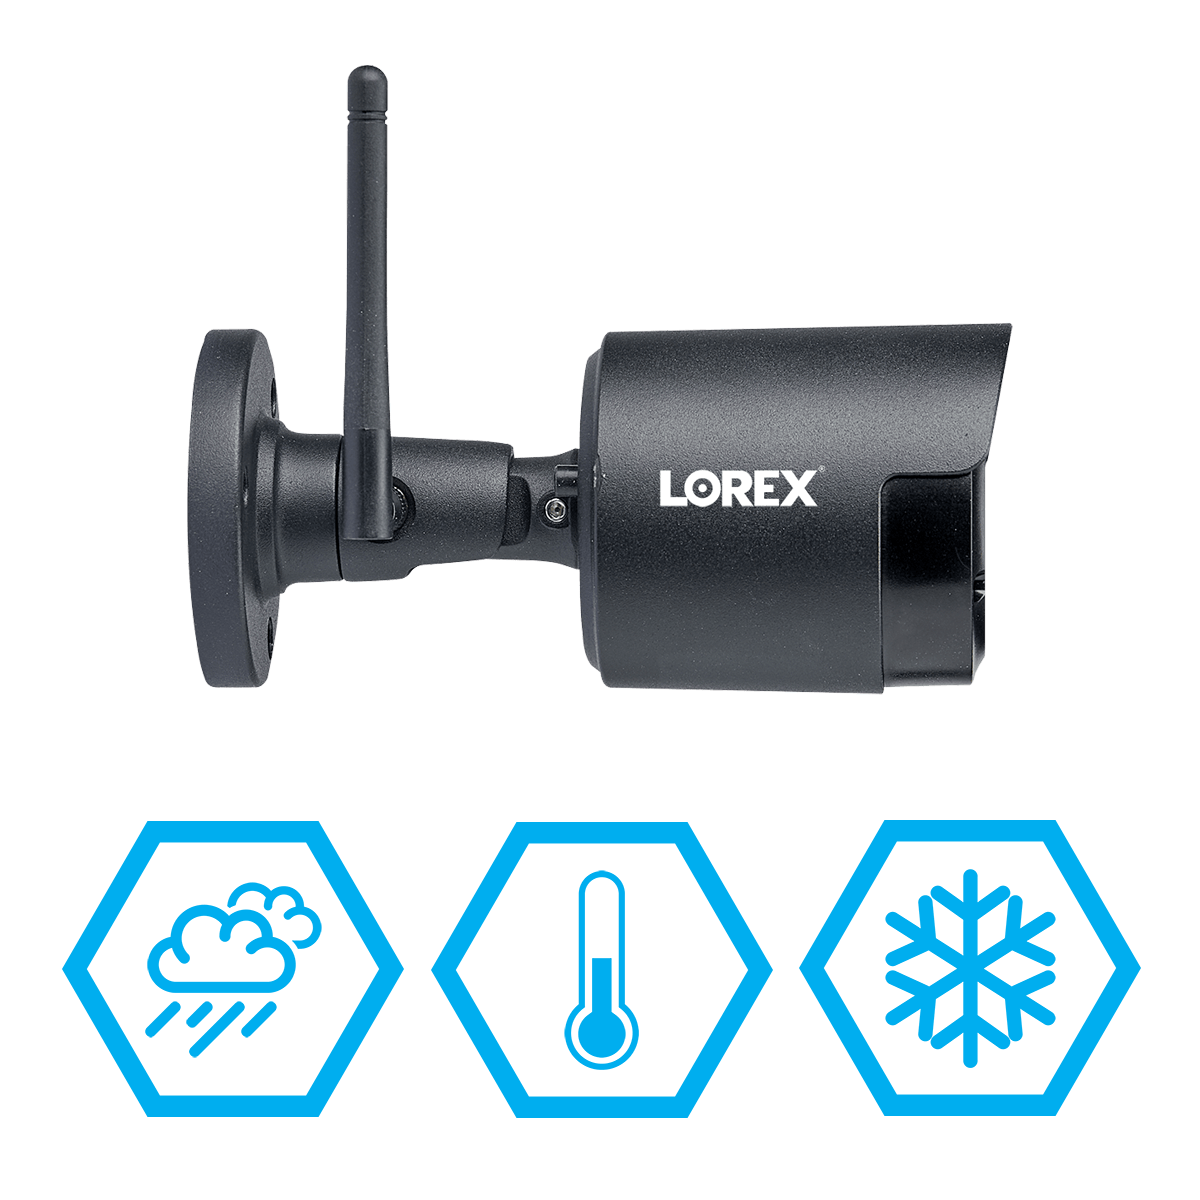 LW4211B Security cameras for all types of weather